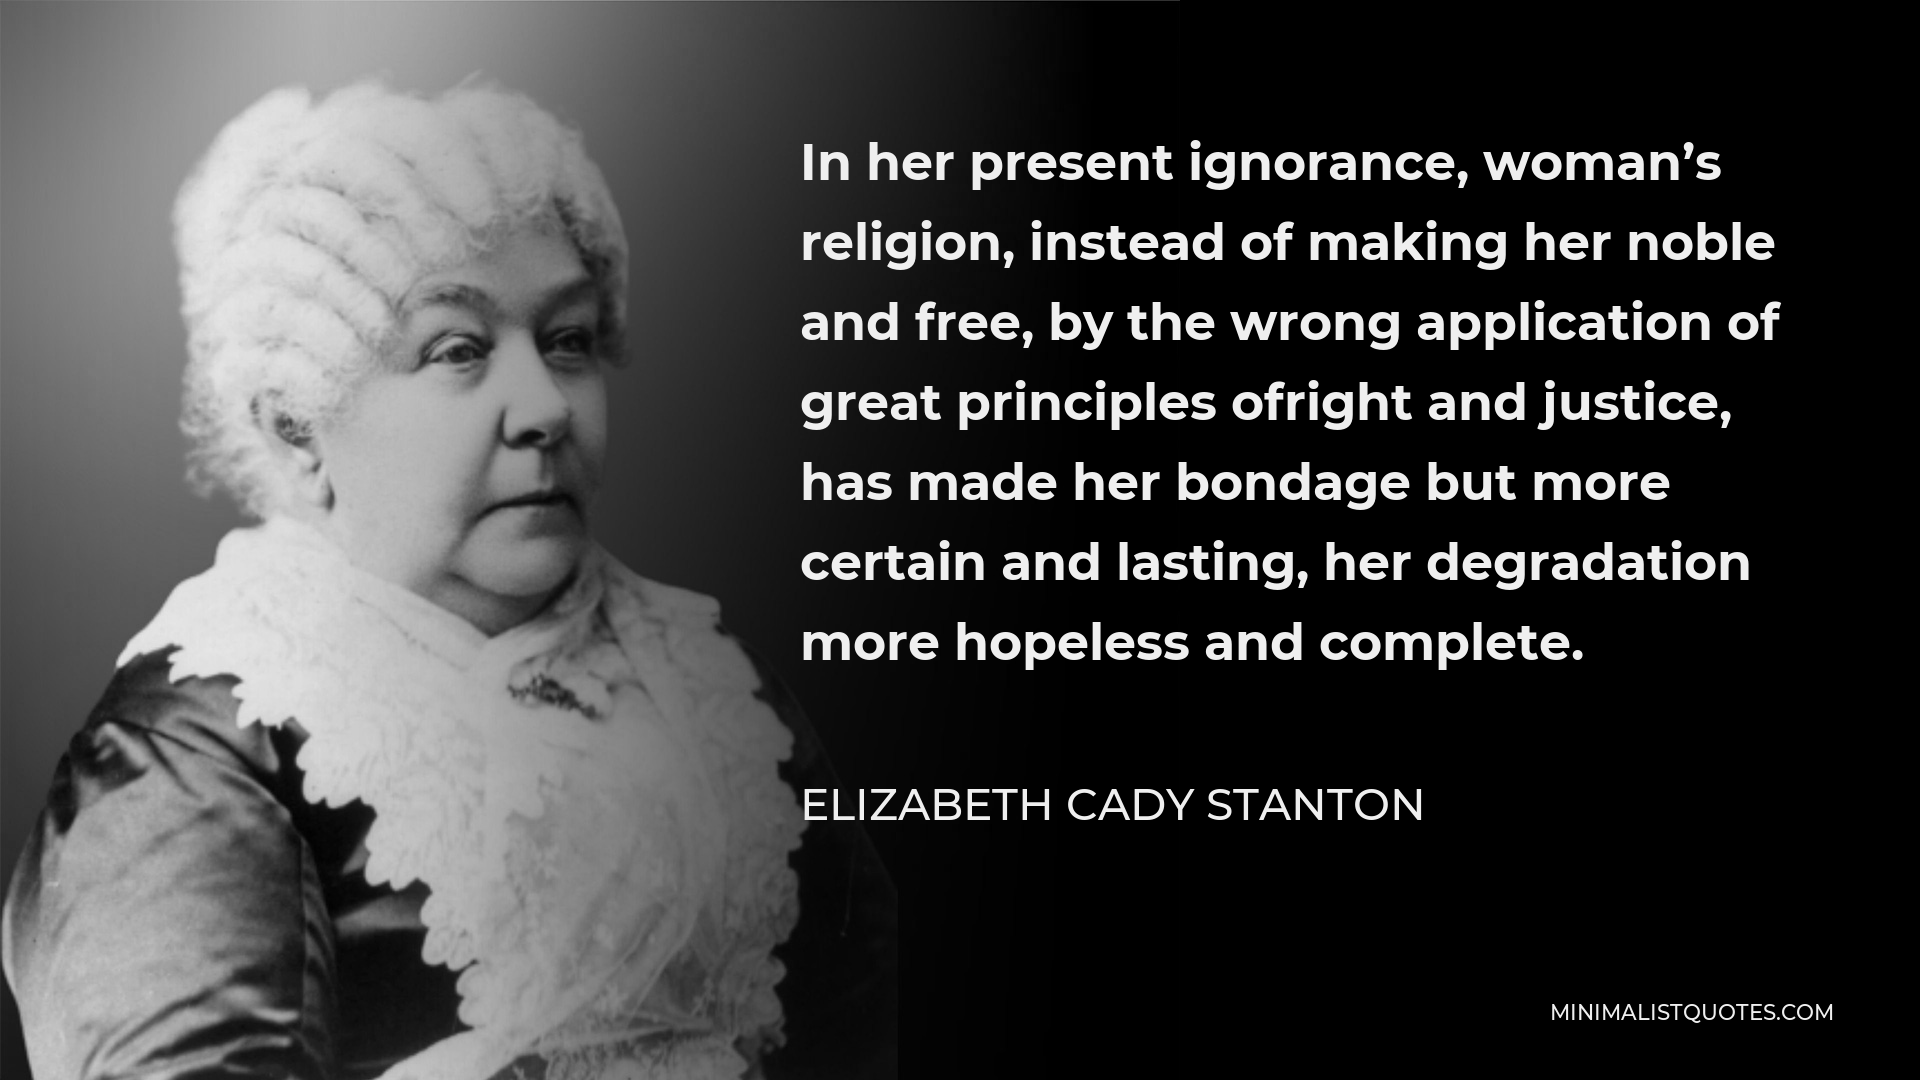 Elizabeth Cady Stanton Quote - In her present ignorance, woman’s religion, instead of making her noble and free, by the wrong application of great principles ofright and justice, has made her bondage but more certain and lasting, her degradation more hopeless and complete.